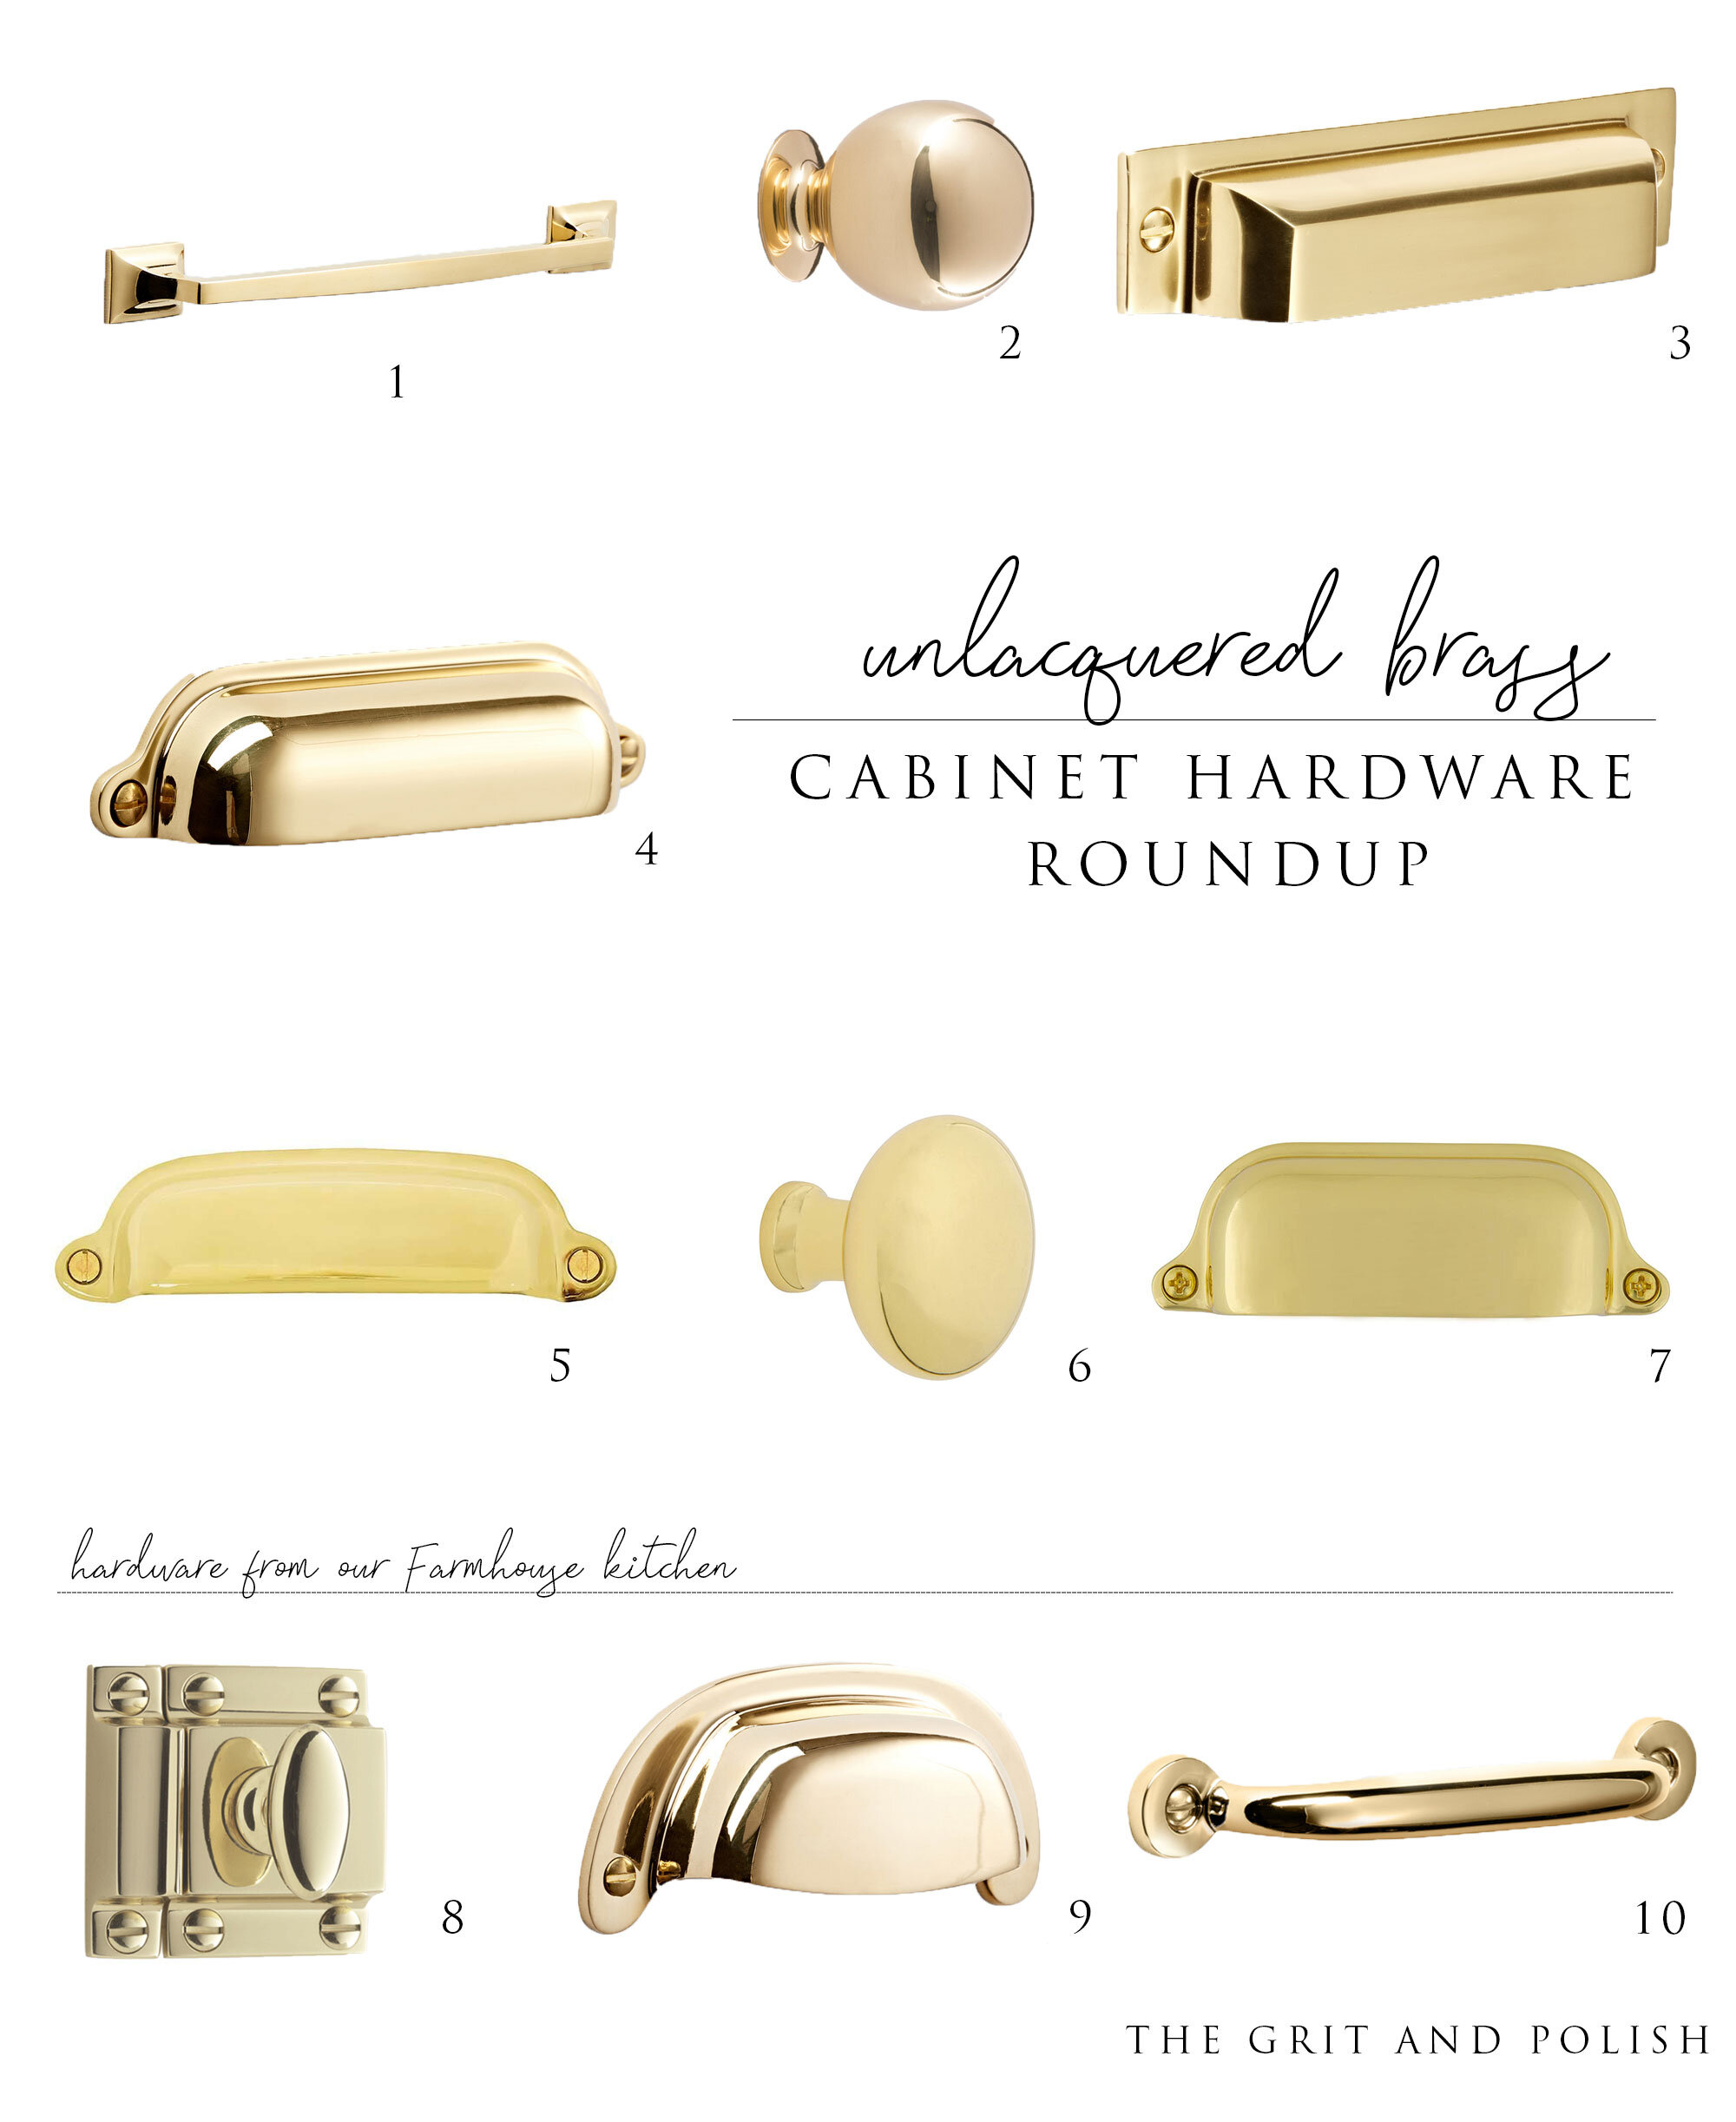 One Year of Age on Our Unlacquered Brass Hardware — The Grit and Polish